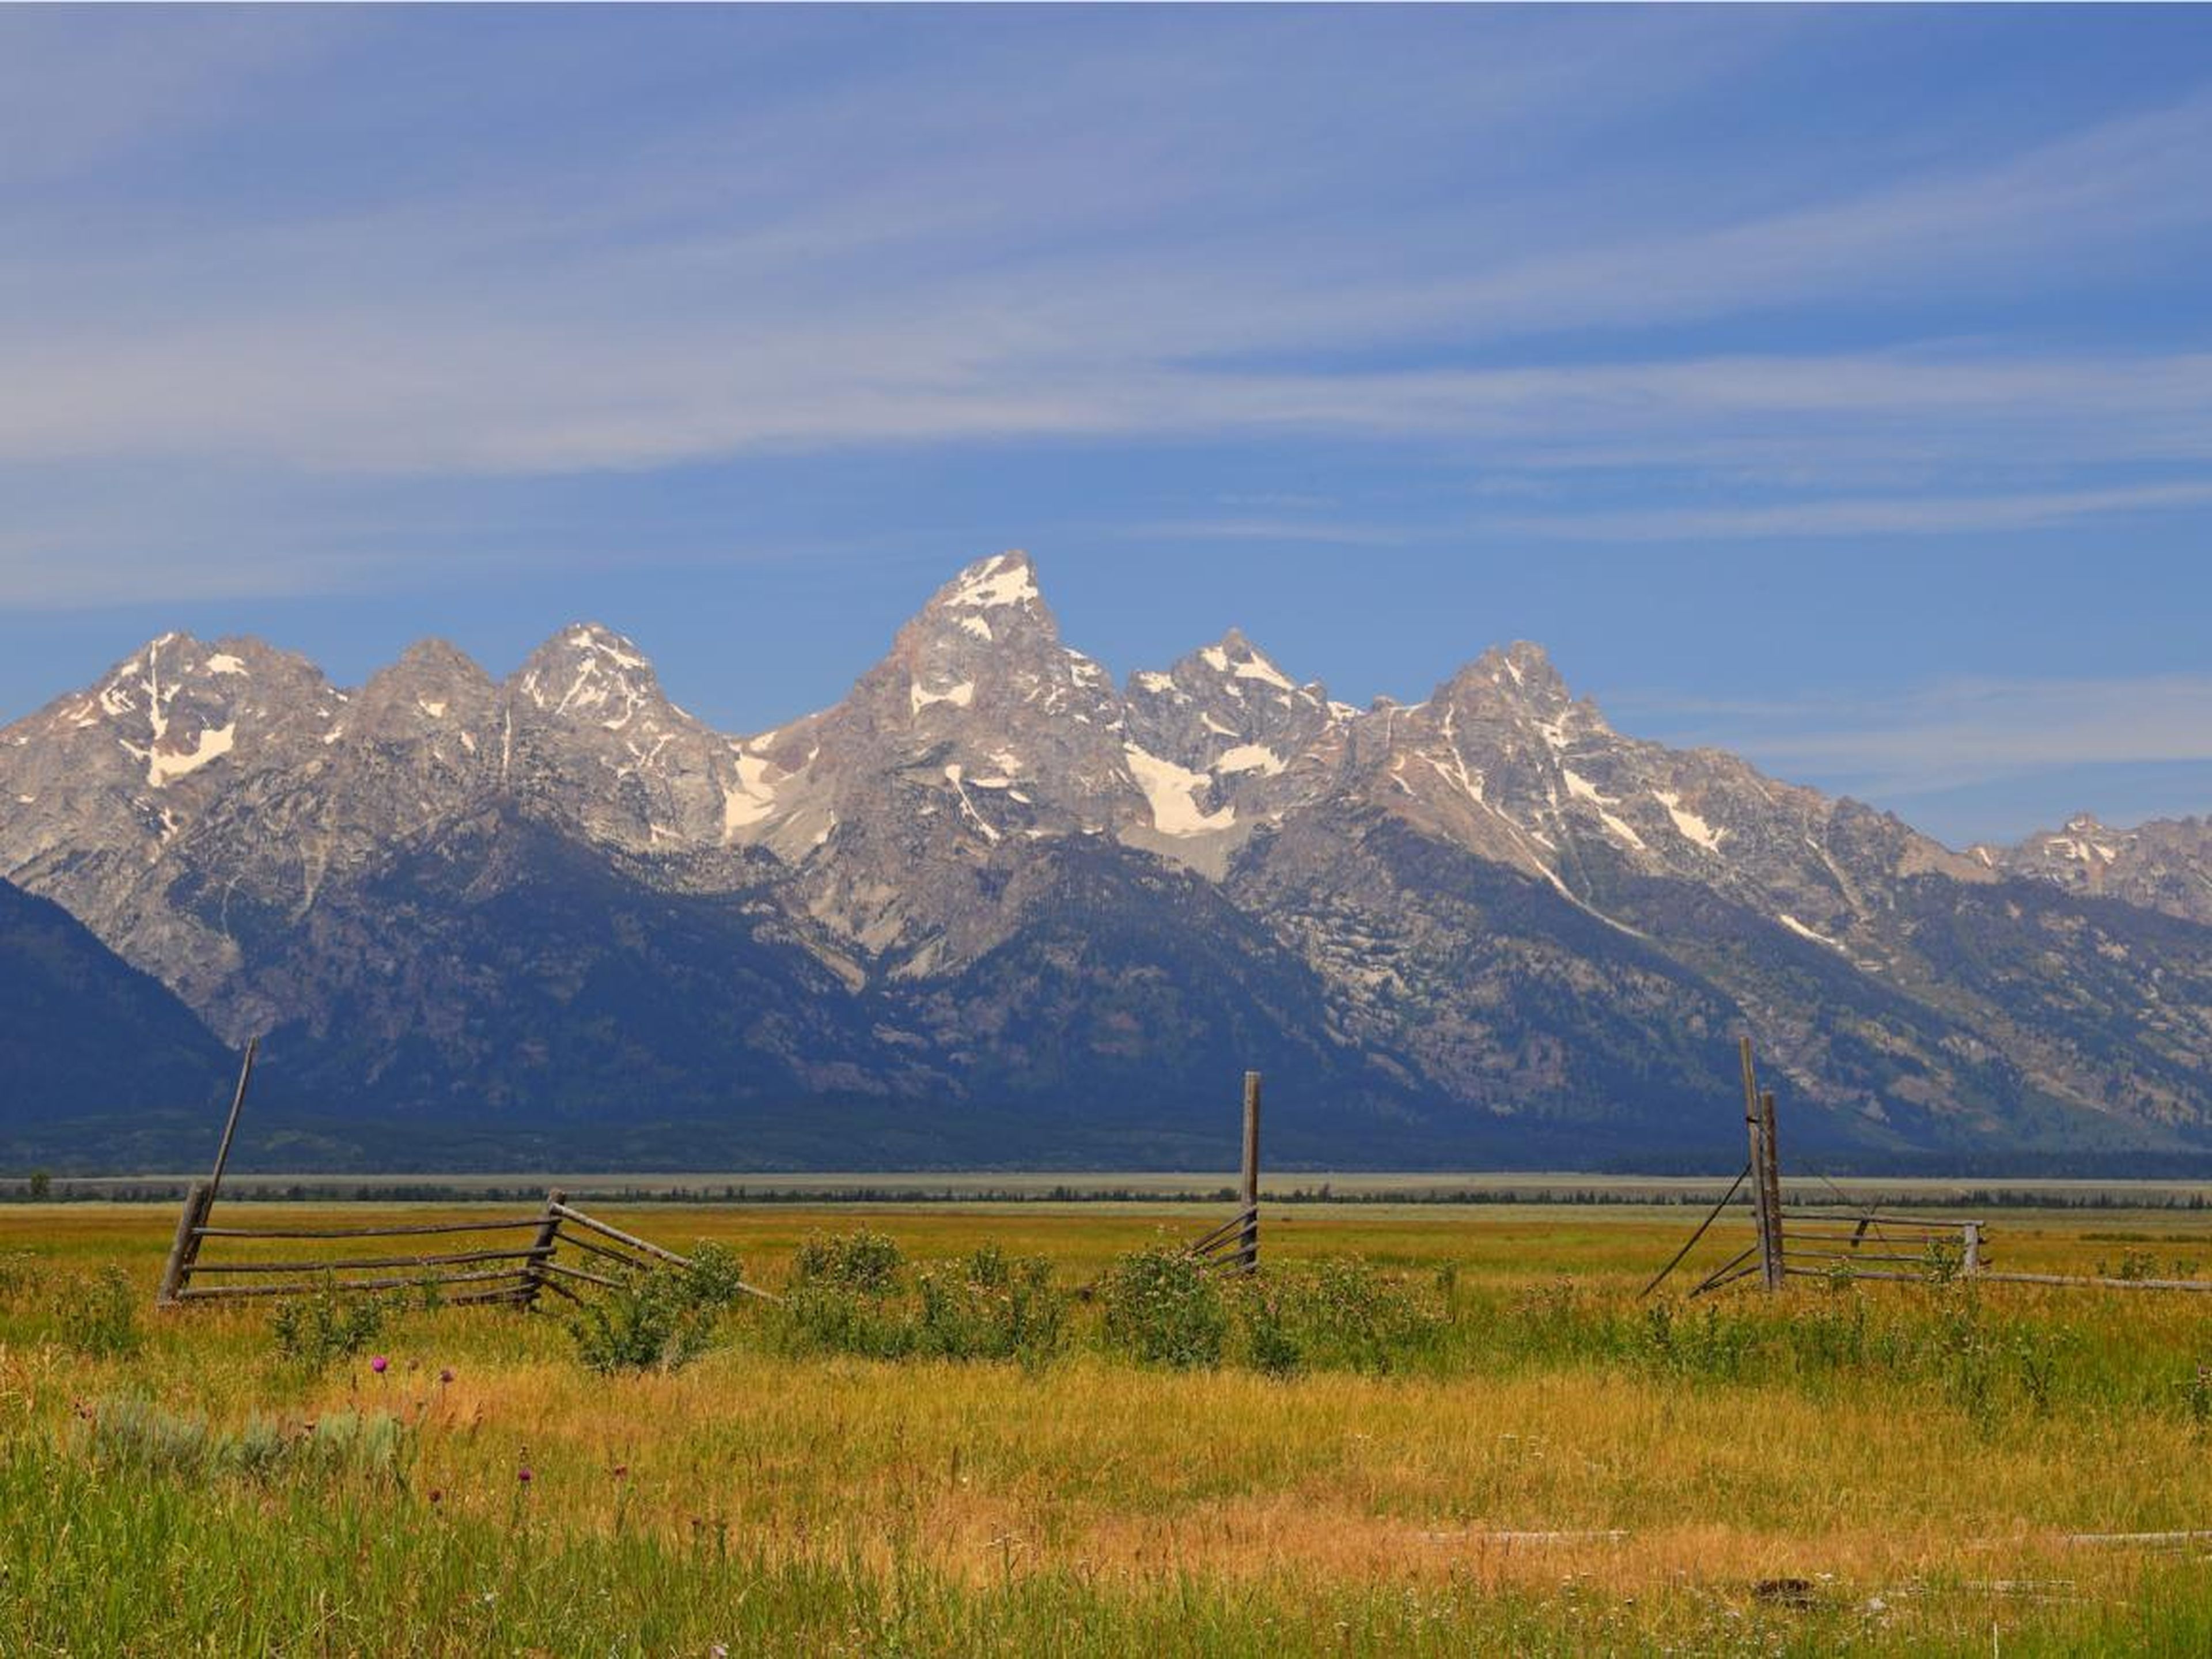 He also reportedly purchased a 492-acre Wyoming ranch that was listed for $8.9 million back in 2009.